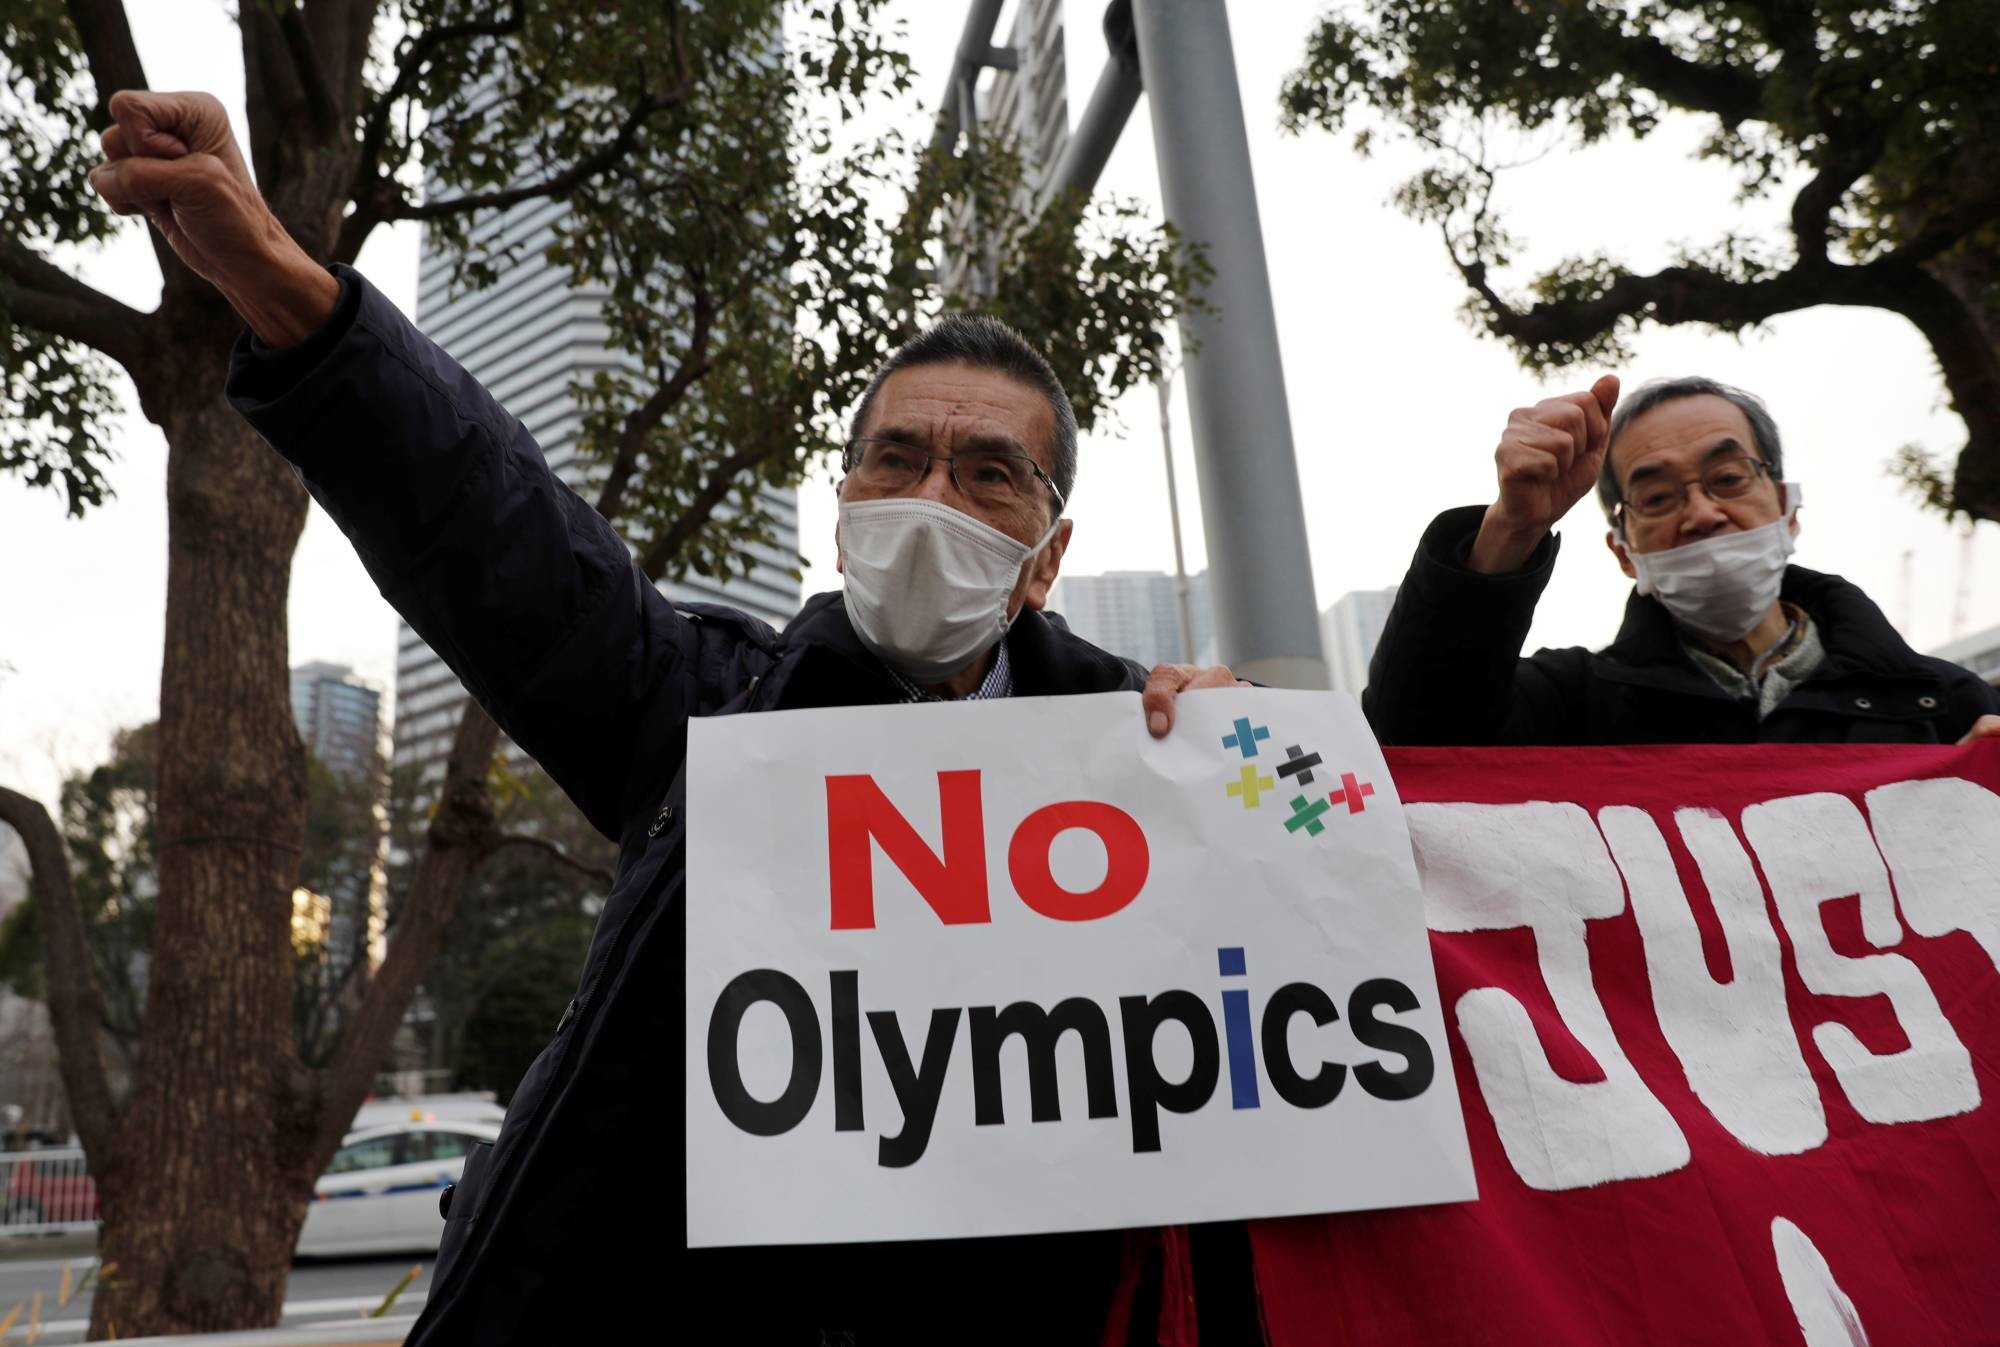 Survey shows that over half of Japan firms want Olympics cancelled or postponed